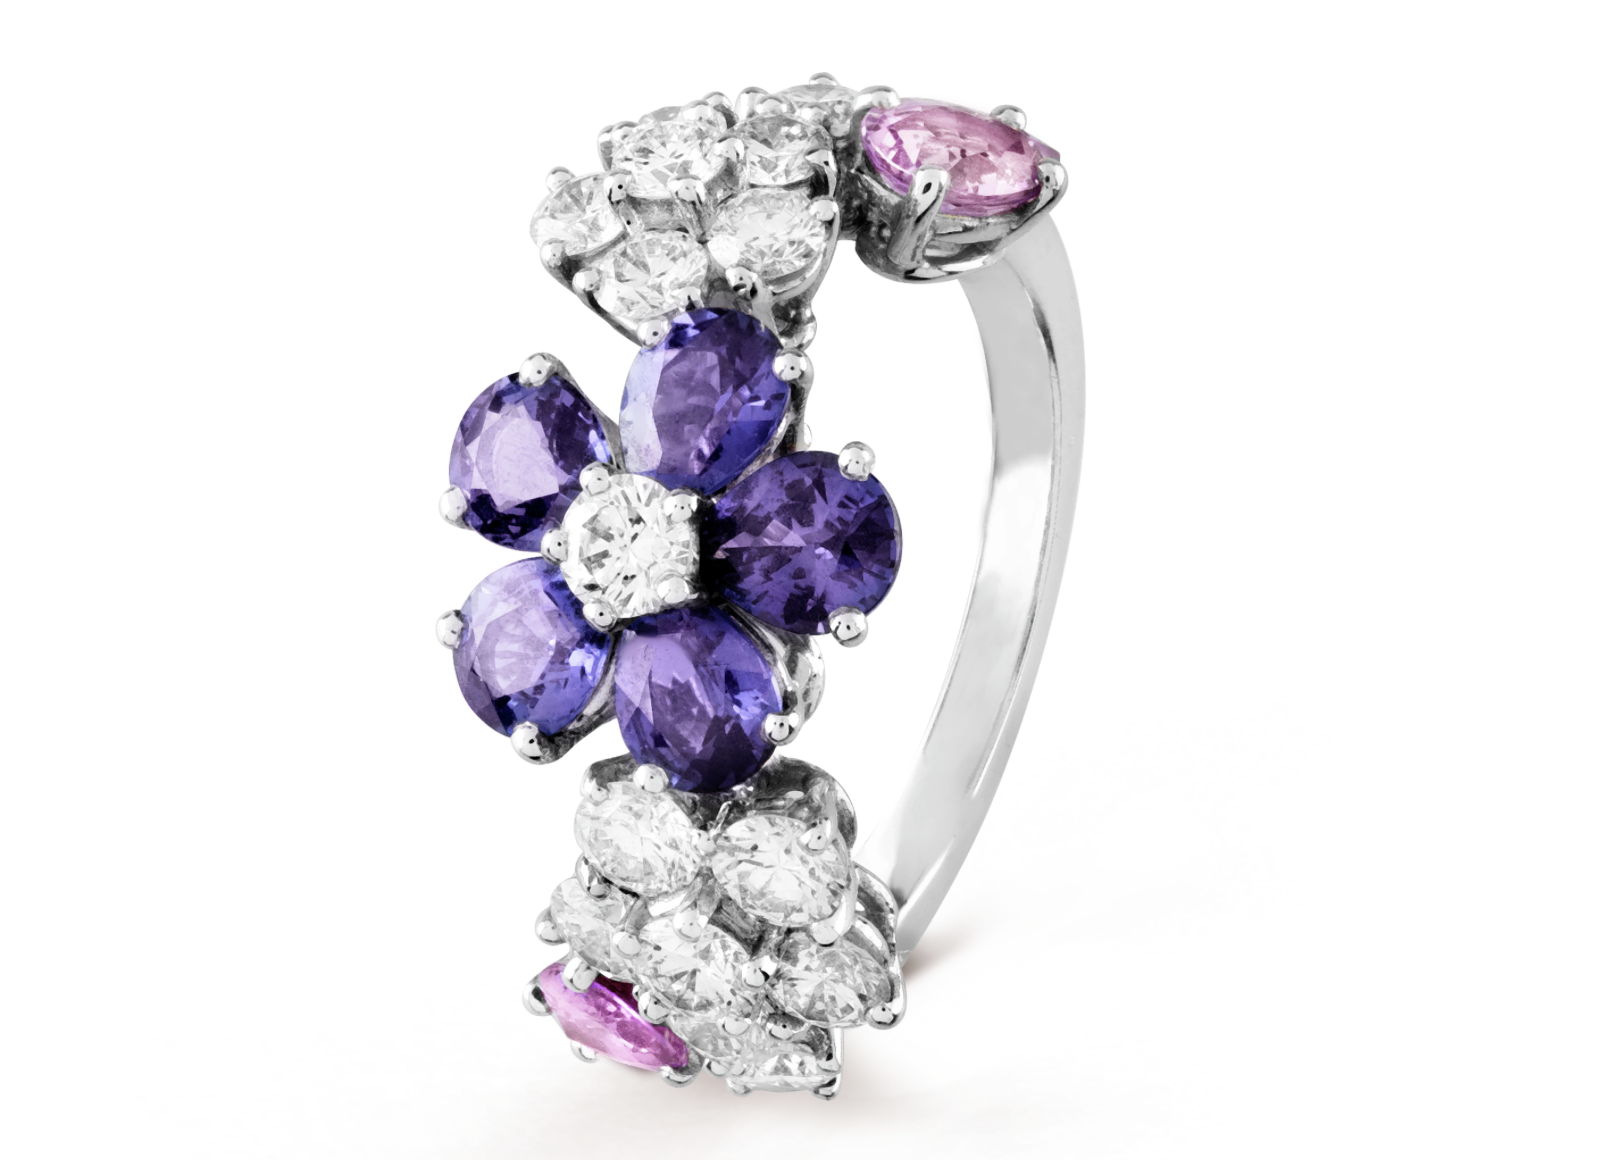 Digital render of Folie des Prés ring from Van Cleef & Arpels, a multi-stone ring creating three lab diamond and purple sapphire flowers.